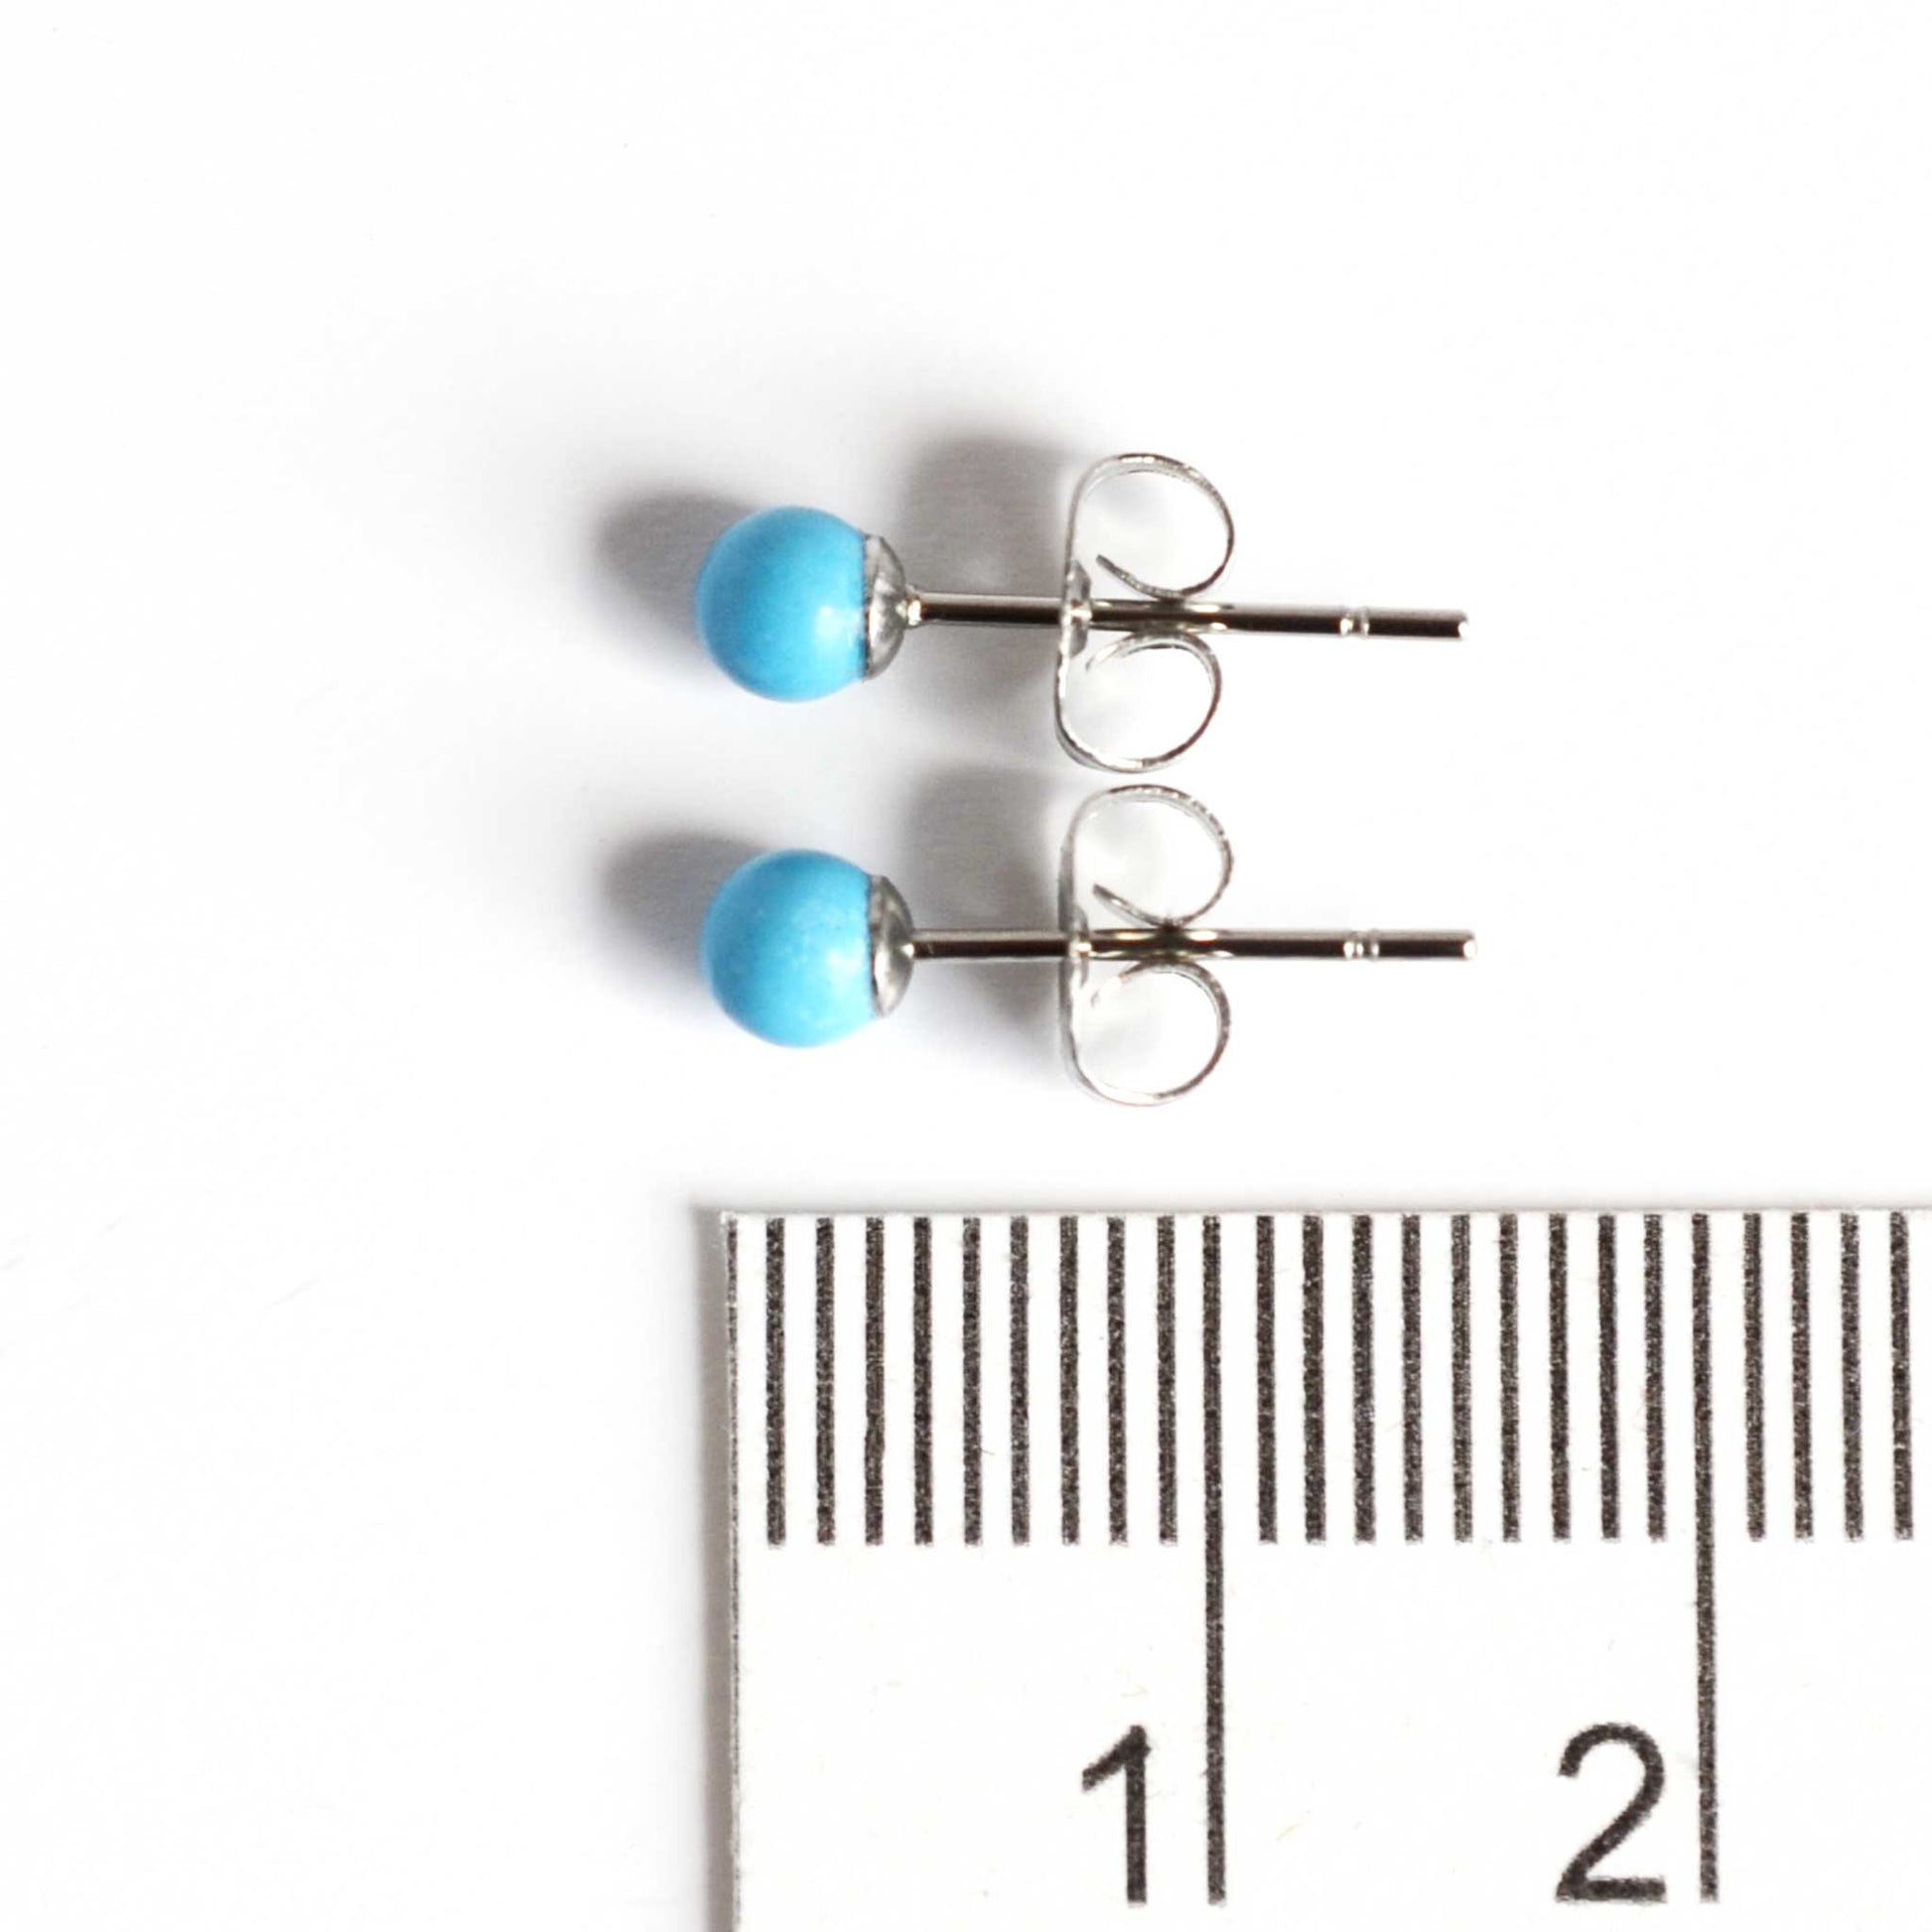 4mm small Turquoise earrings next to ruler